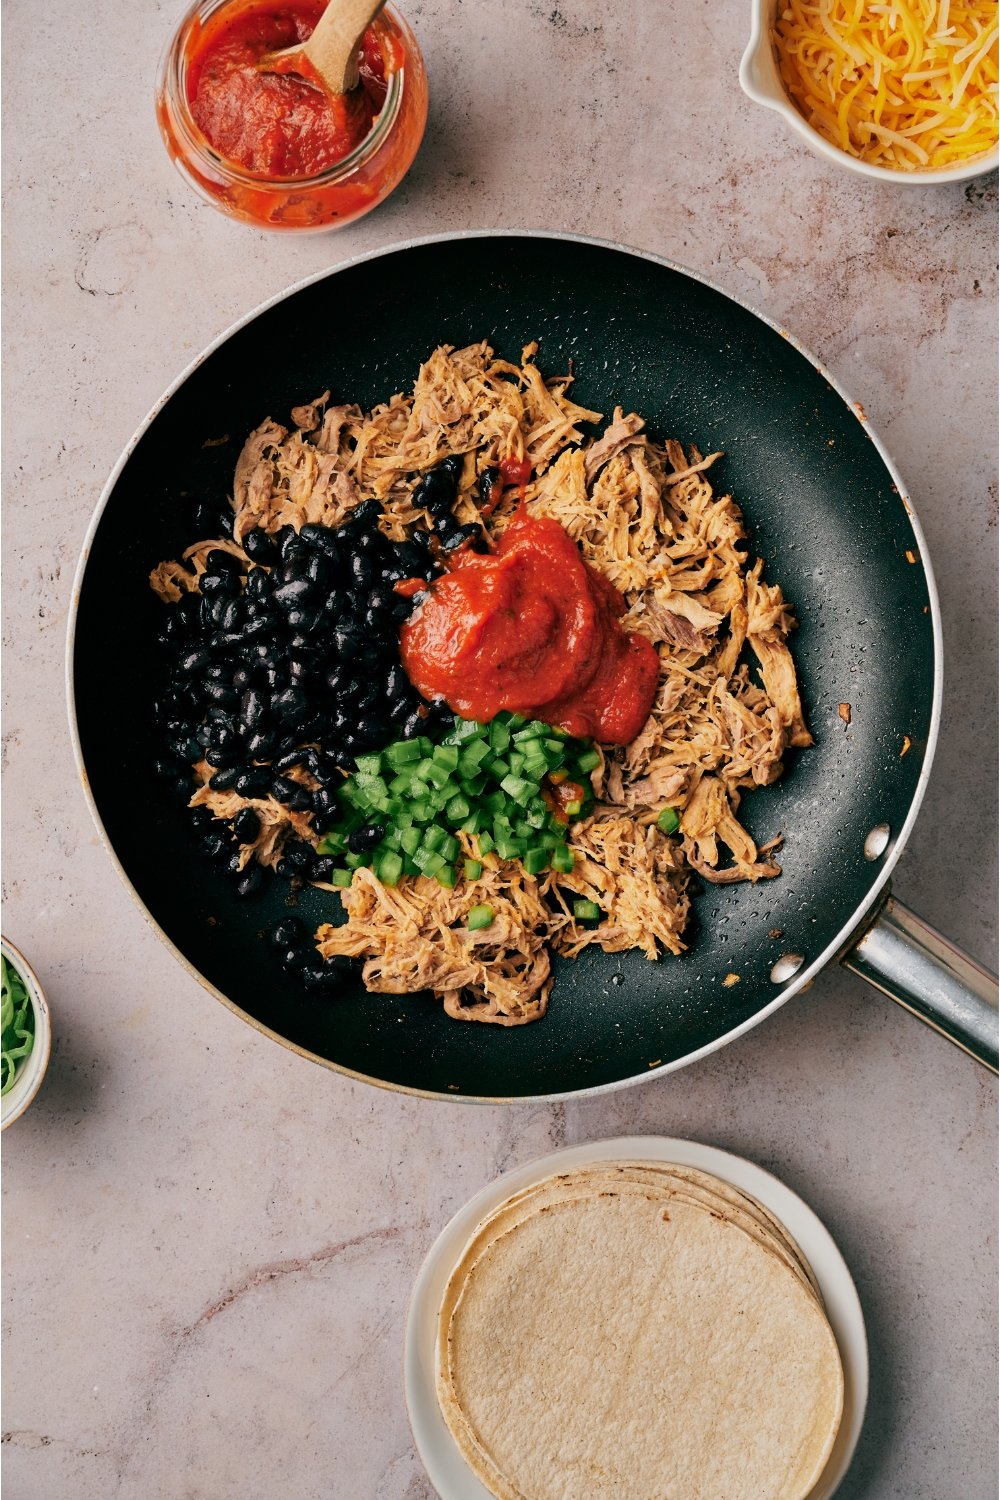 A skillet filled with cooked shredded pork, black beans, tomato sauce, and diced bell pepper.